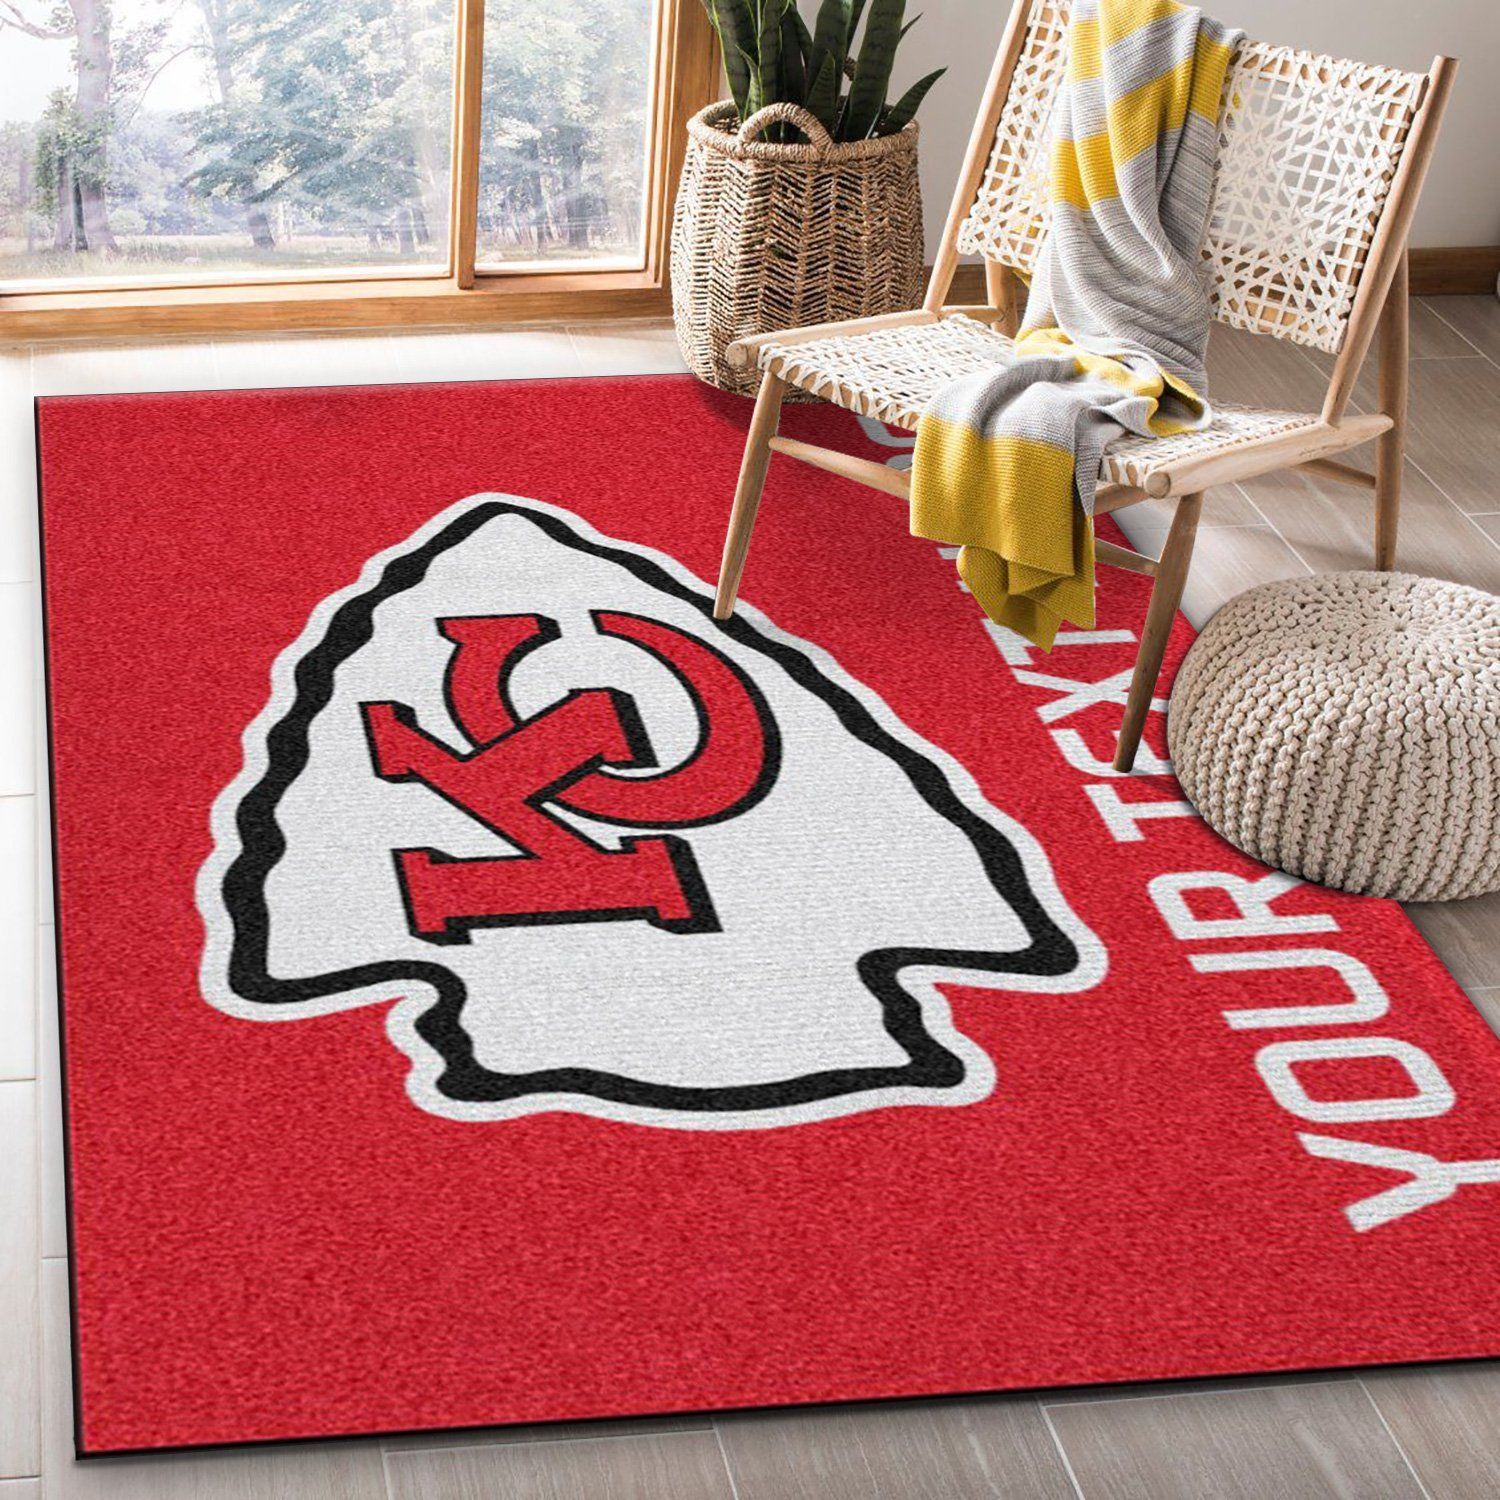 Customizable Kansas City Chiefs Personalized Accent Rug NFL Area Rug For Christmas